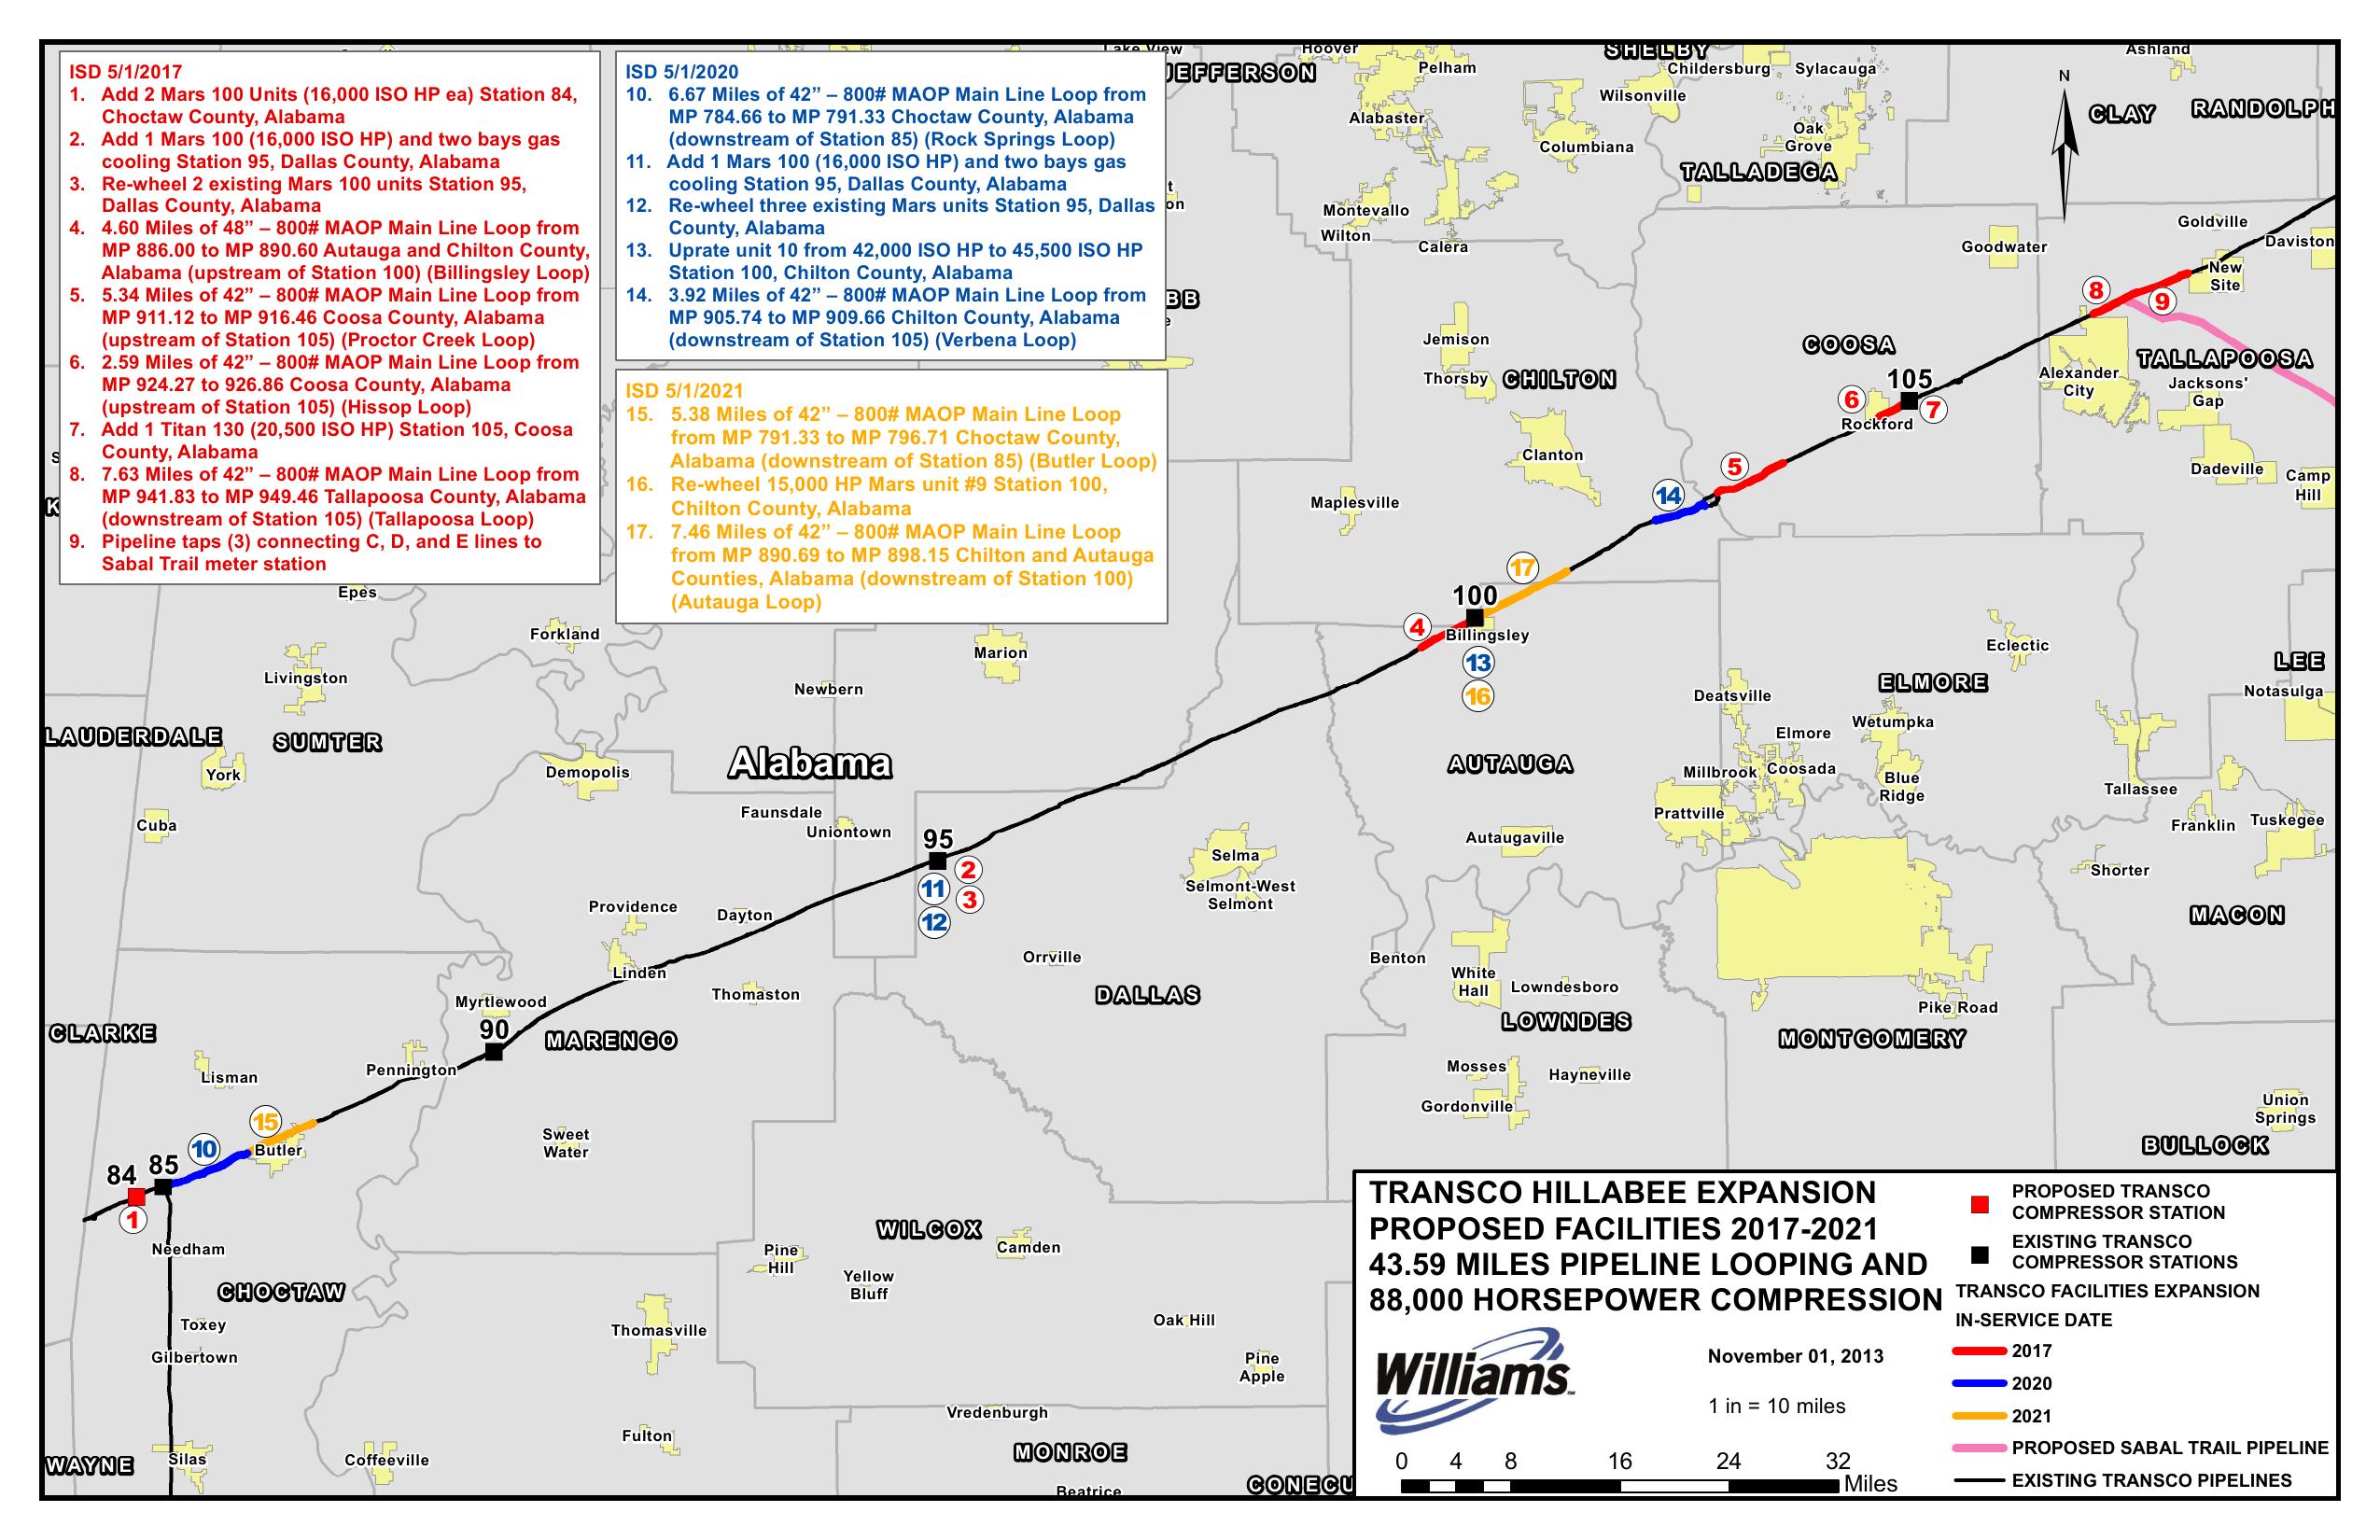 Map of Transco Hillabee Expansion Proposed Facilities 2017-2021, in Request for Pre-Filing Review, by Transcontinental Gas Pipe Line, for FERC Docket No. PF14-6, 4 November 2013